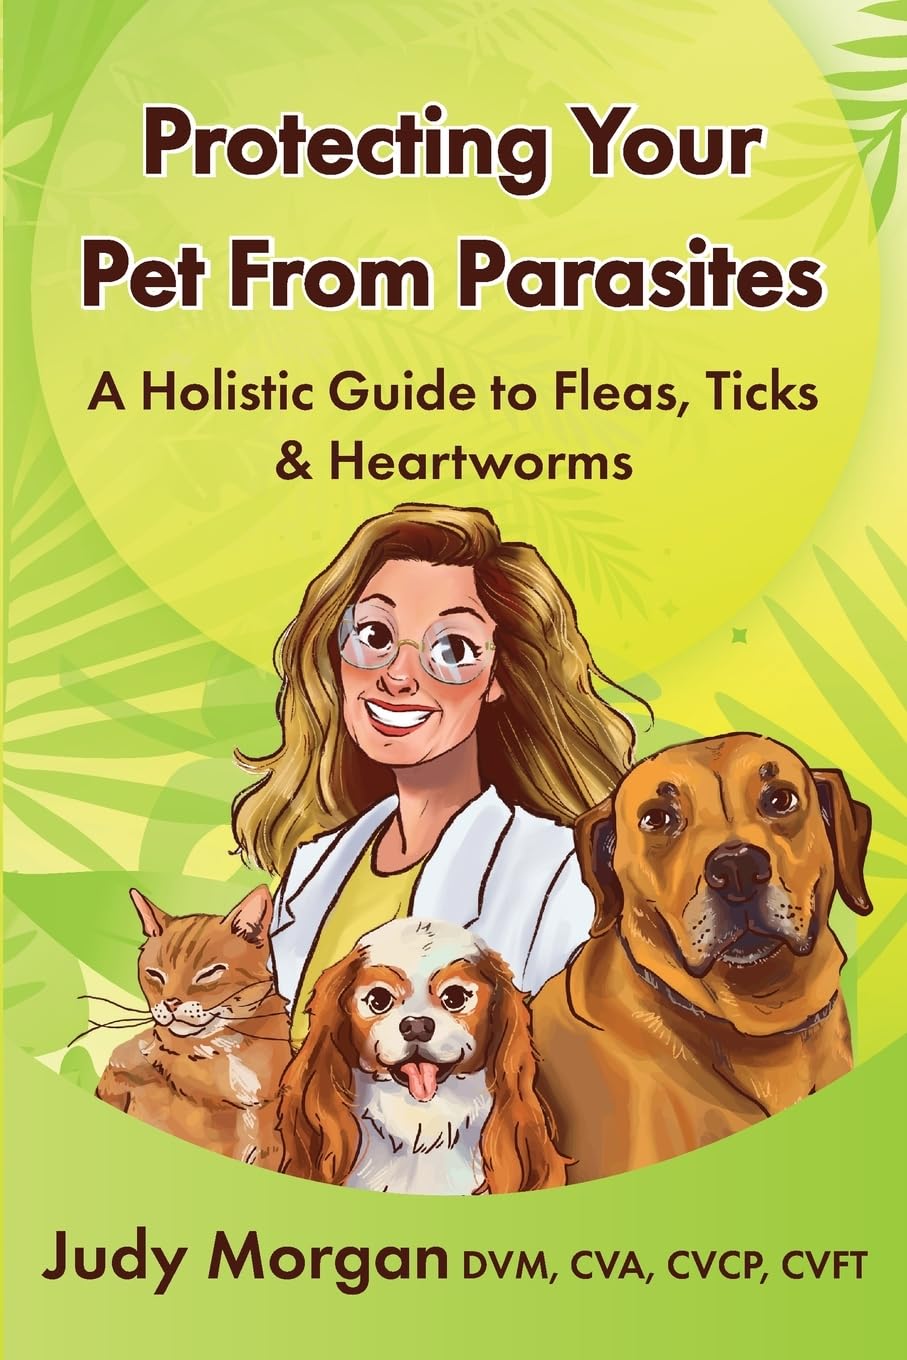 Protecting Your Pets from Parasites: A Holistic Guide to Fleas, Ticks & Heartworms